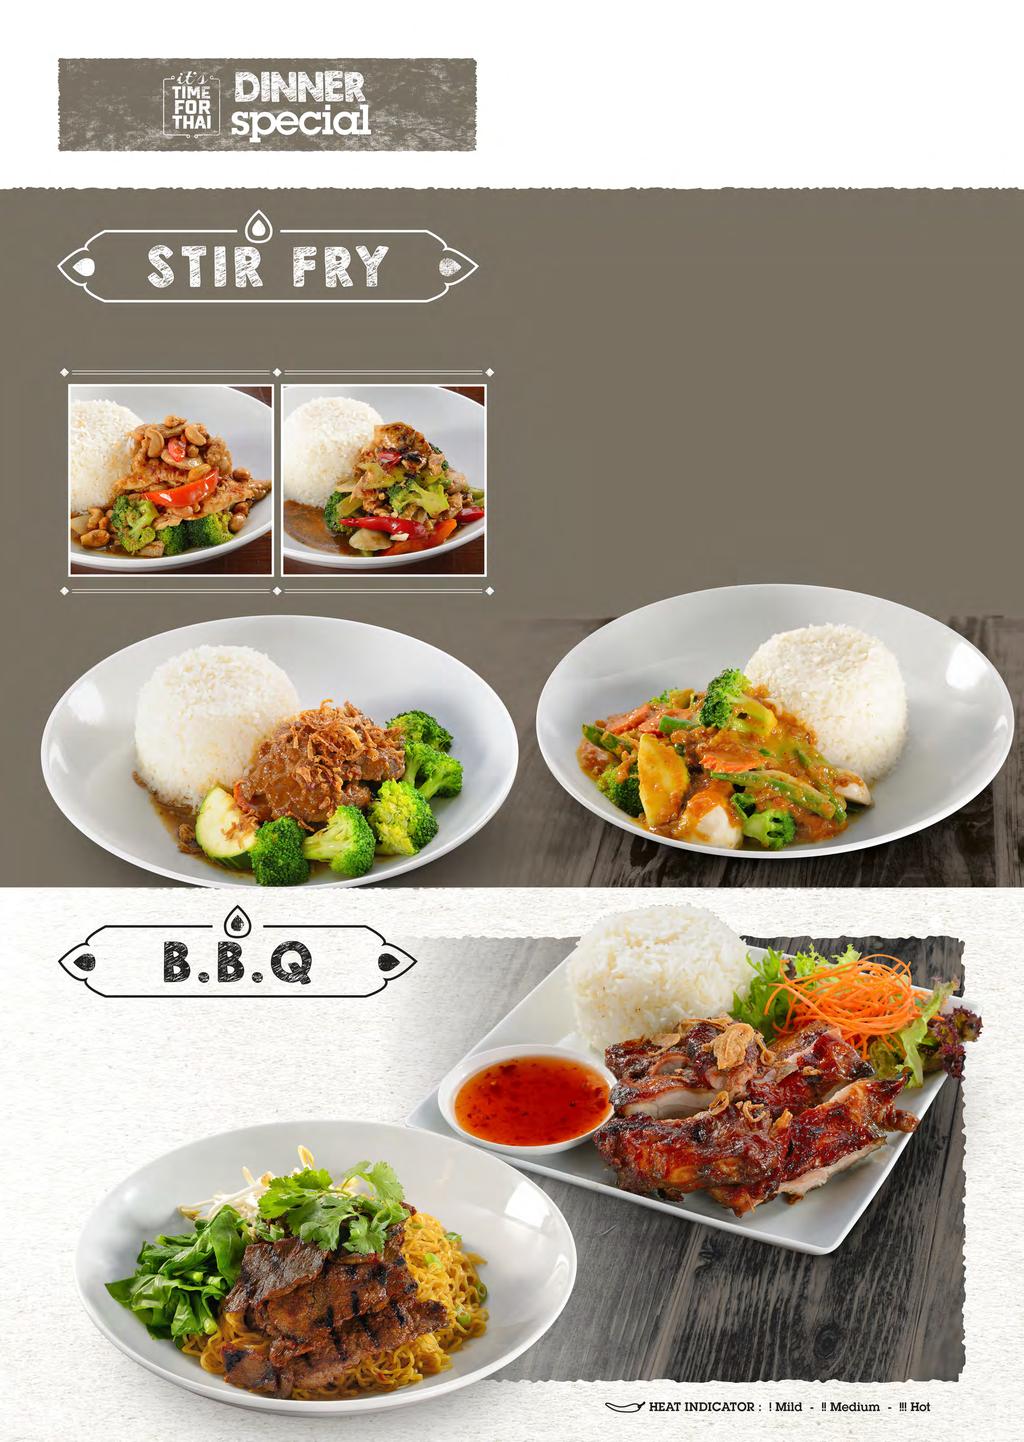 OR BEEF................ $13 DUCK OR BEEF RIB............... $16 PRAWN OR MIX SEAFOOD......... $17 STIR FRY DISHES SERVED WITH STEAMED RICE OR STIR-FRIED WITH CASHEW NUT SAUCE BLACK BEAN SAUCE 52.